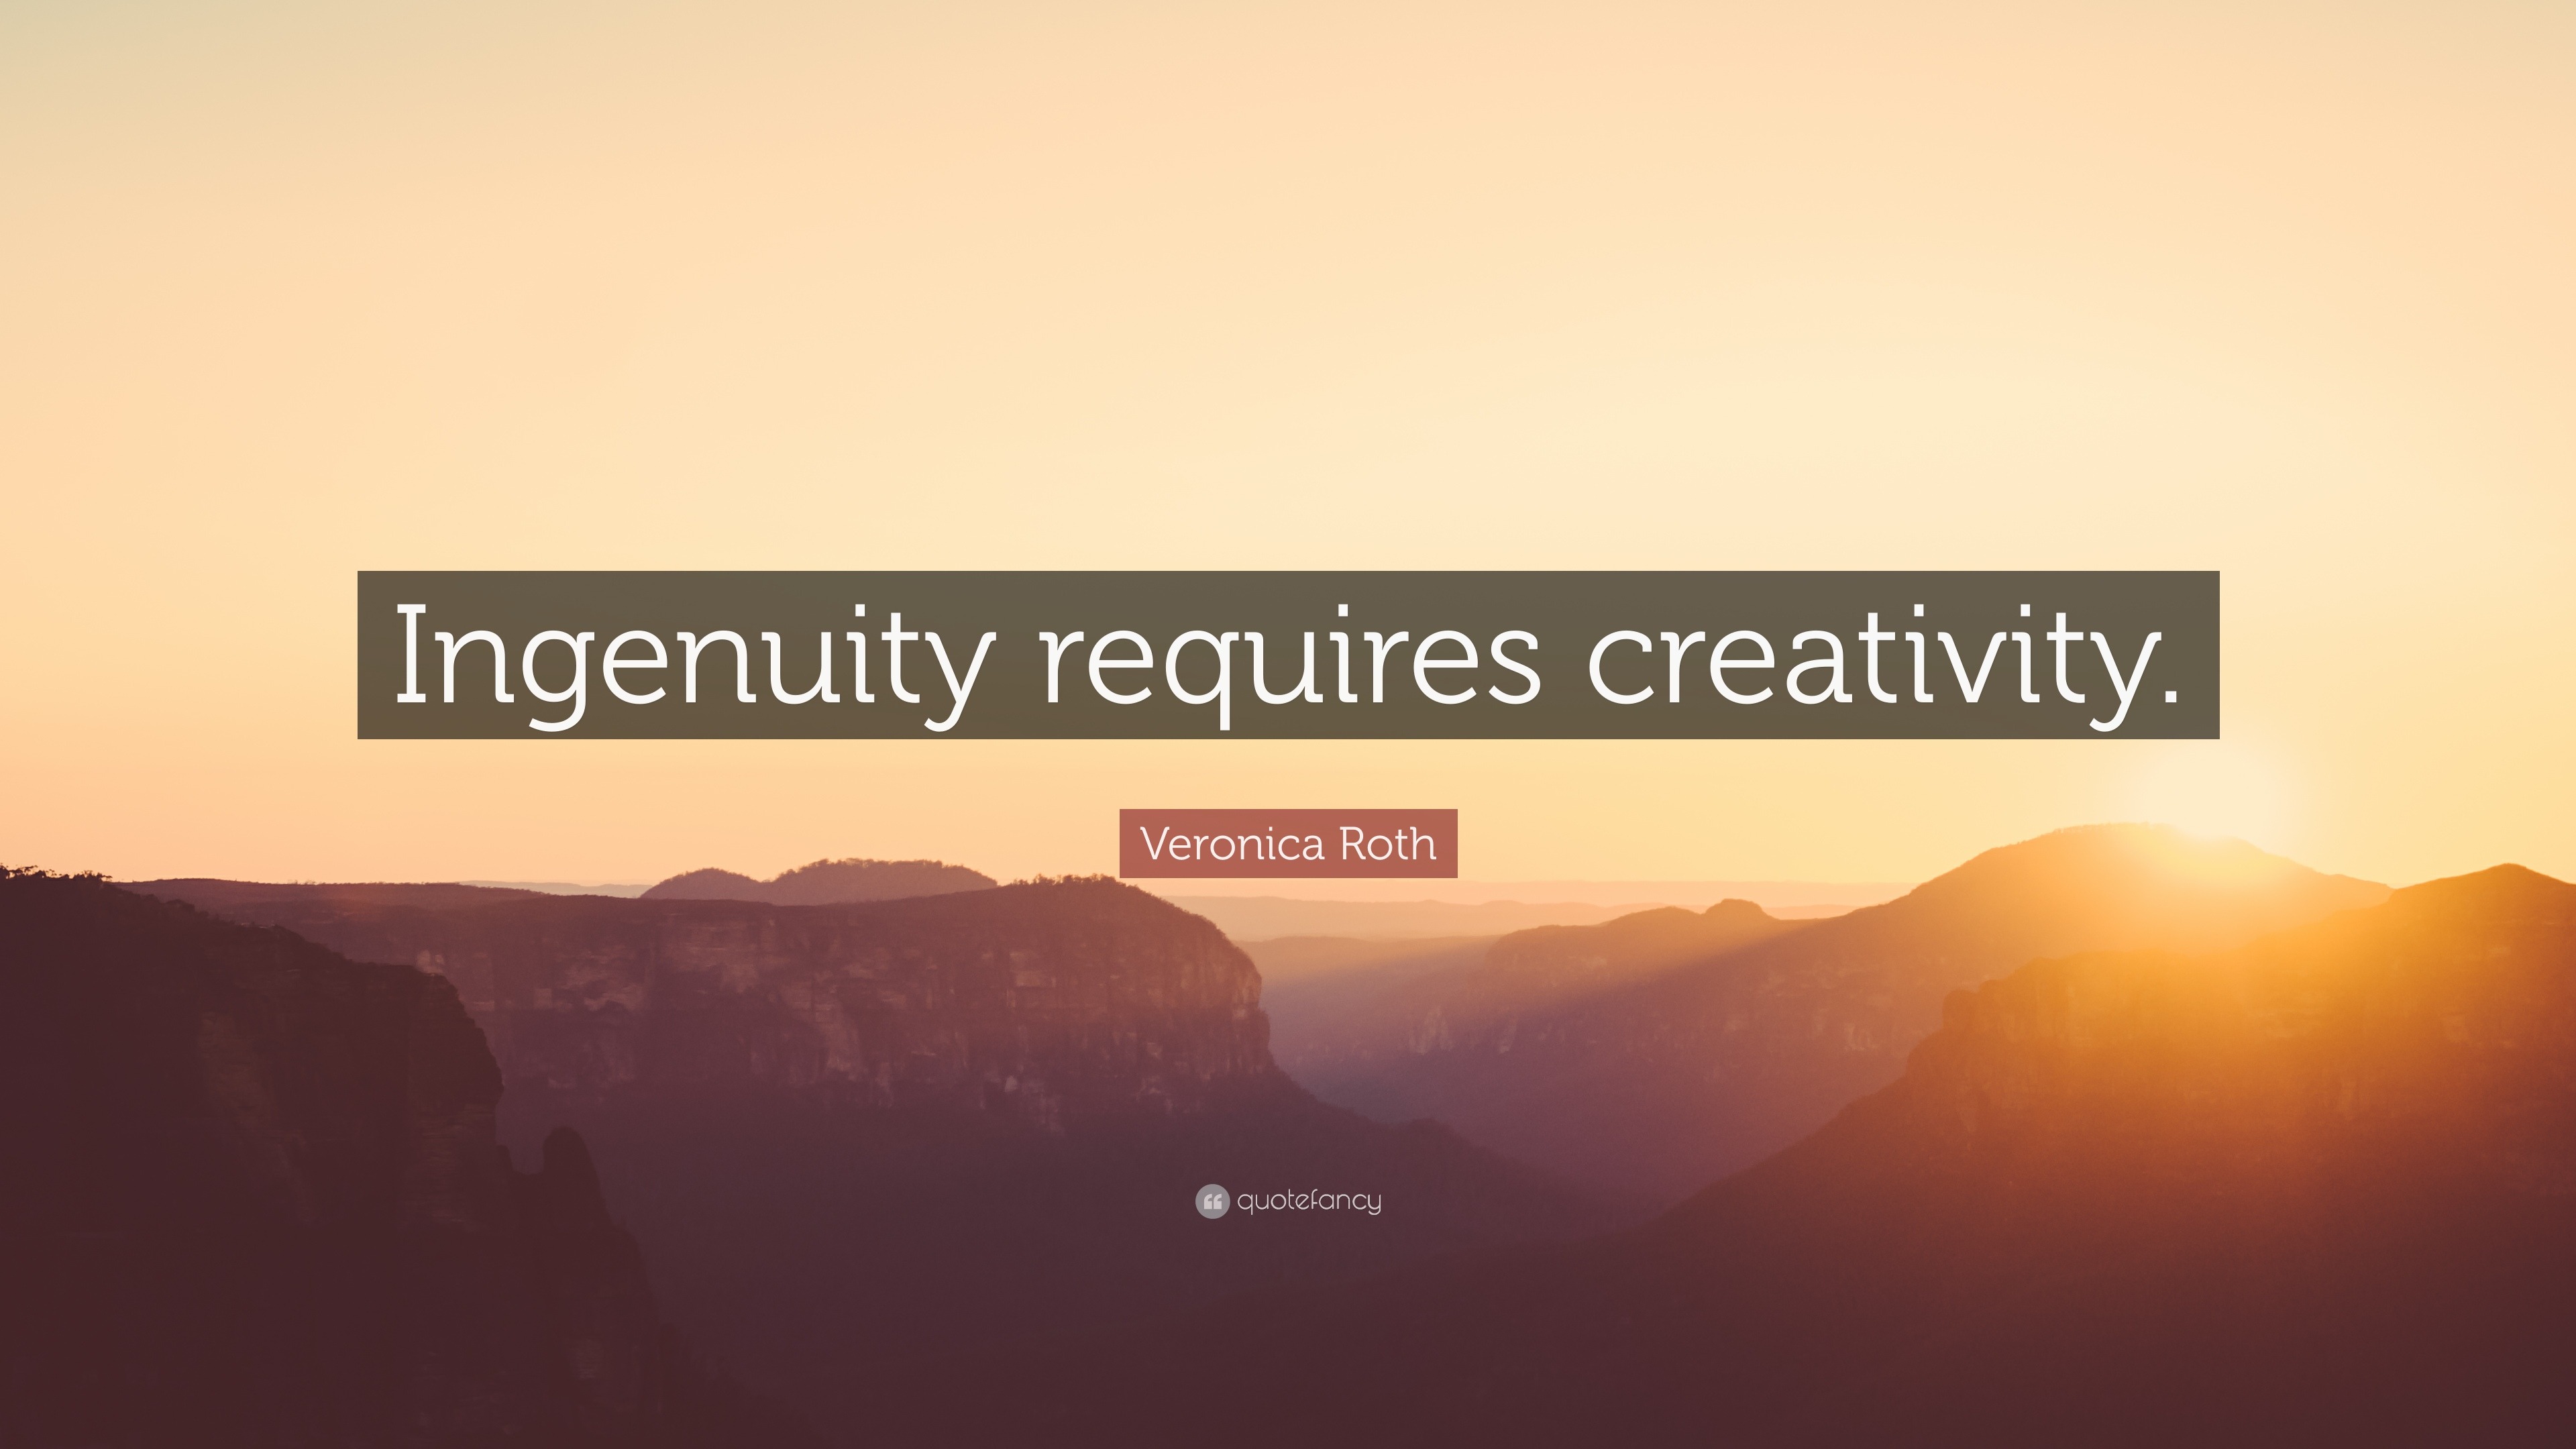 Veronica Roth Quote: "Ingenuity requires creativity."